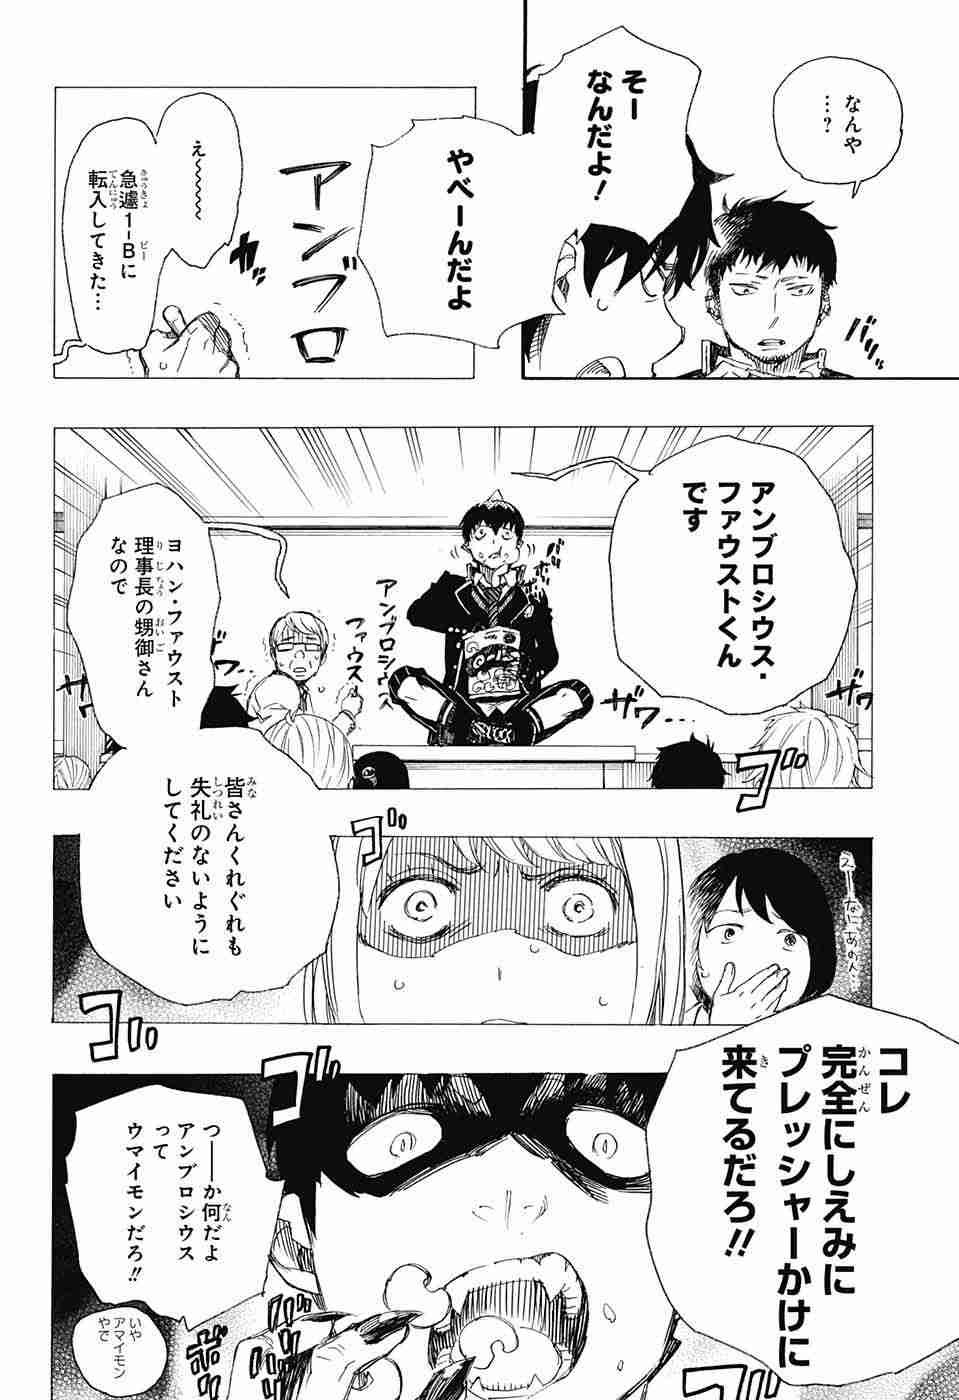 Ao no Exorcist - Chapter 84 - Page 4